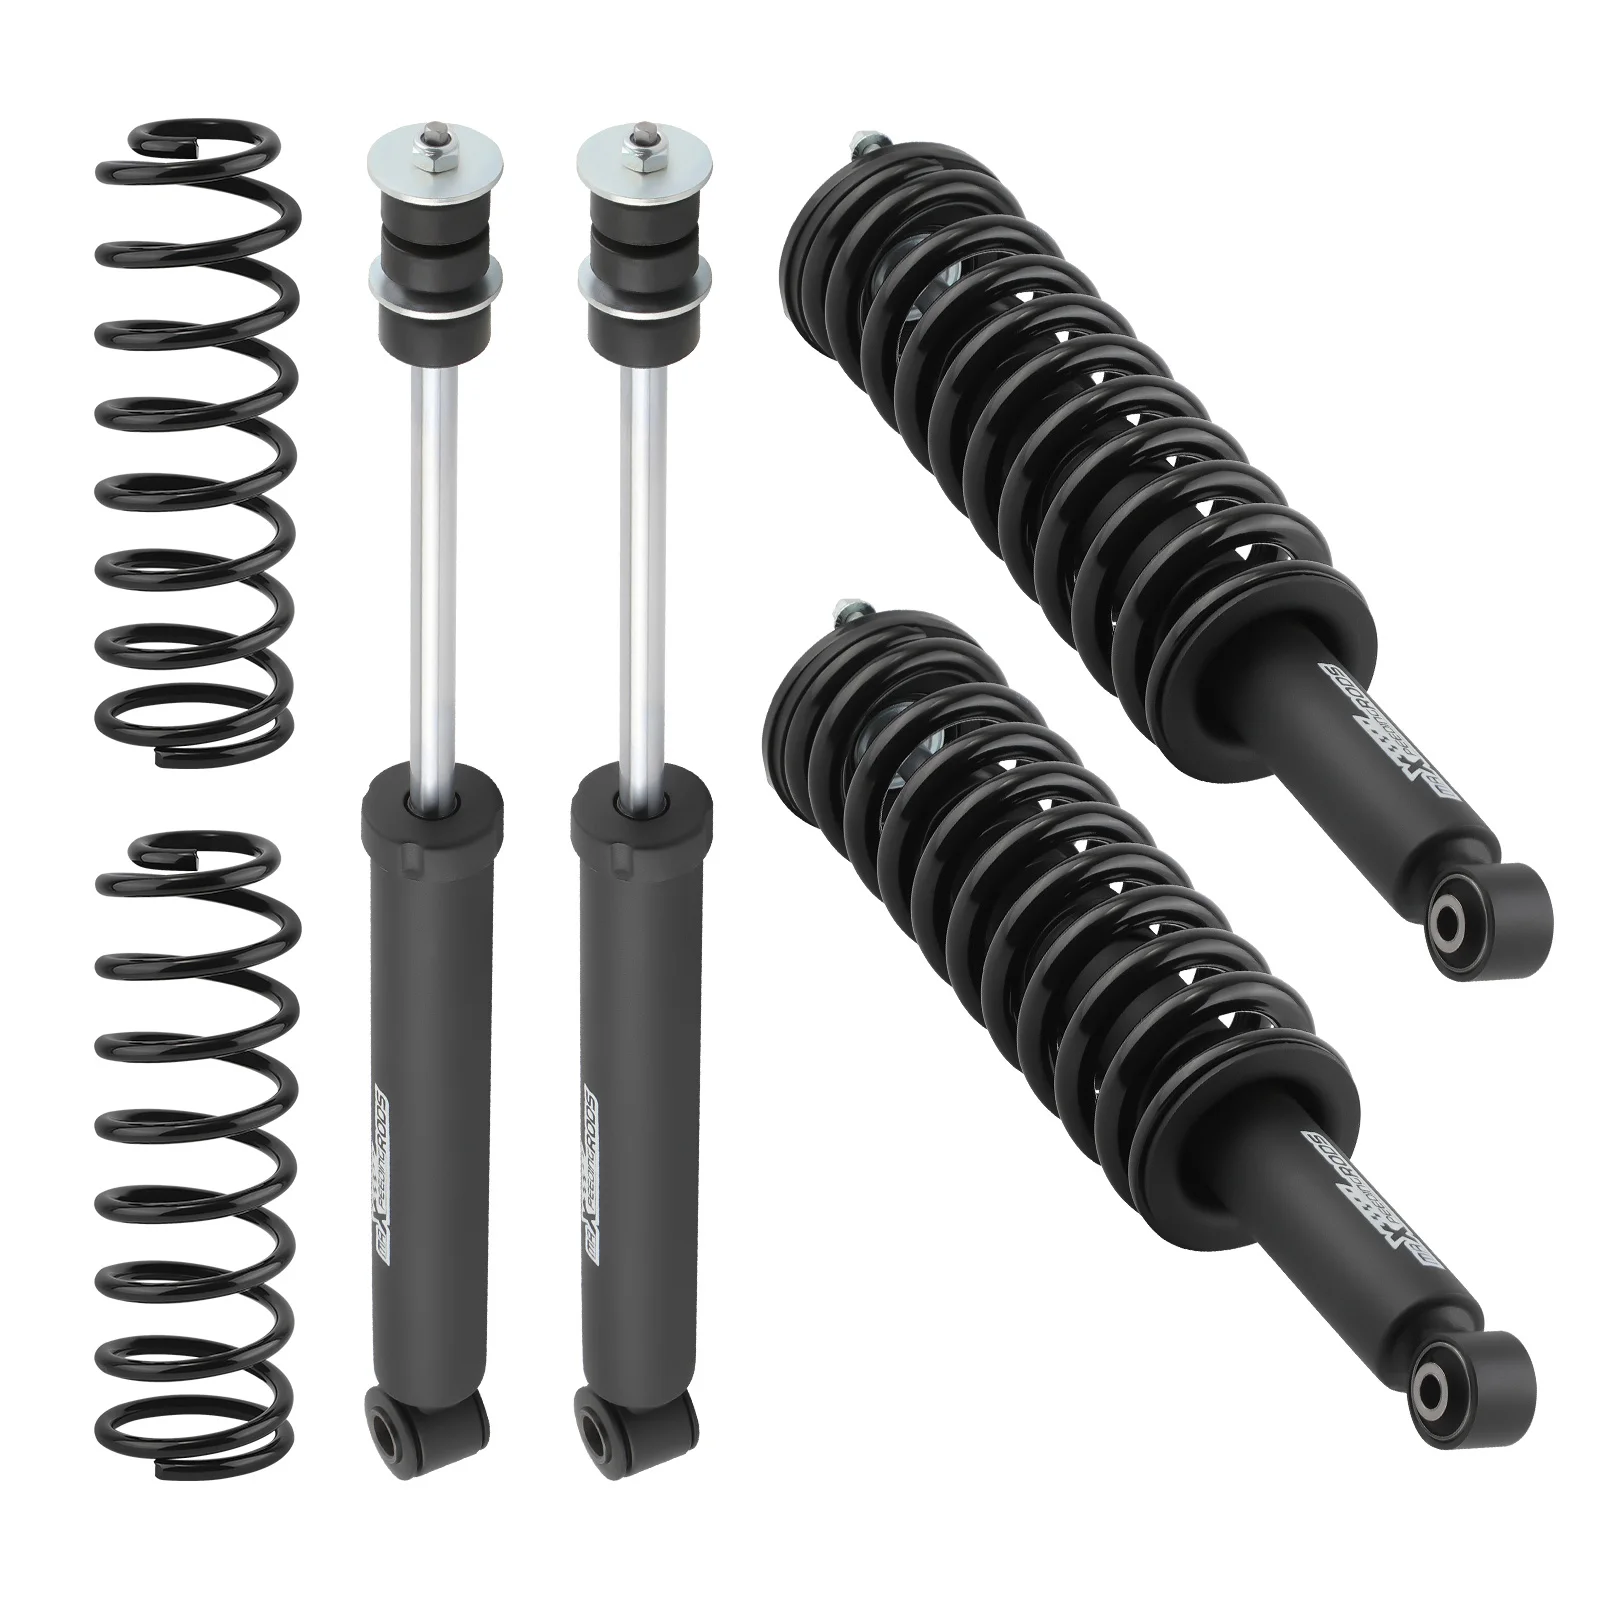 

3" Suspension Lift Kit Shock Absorbers For Toyota 4 Runner 2WD 4WD 1996-2002